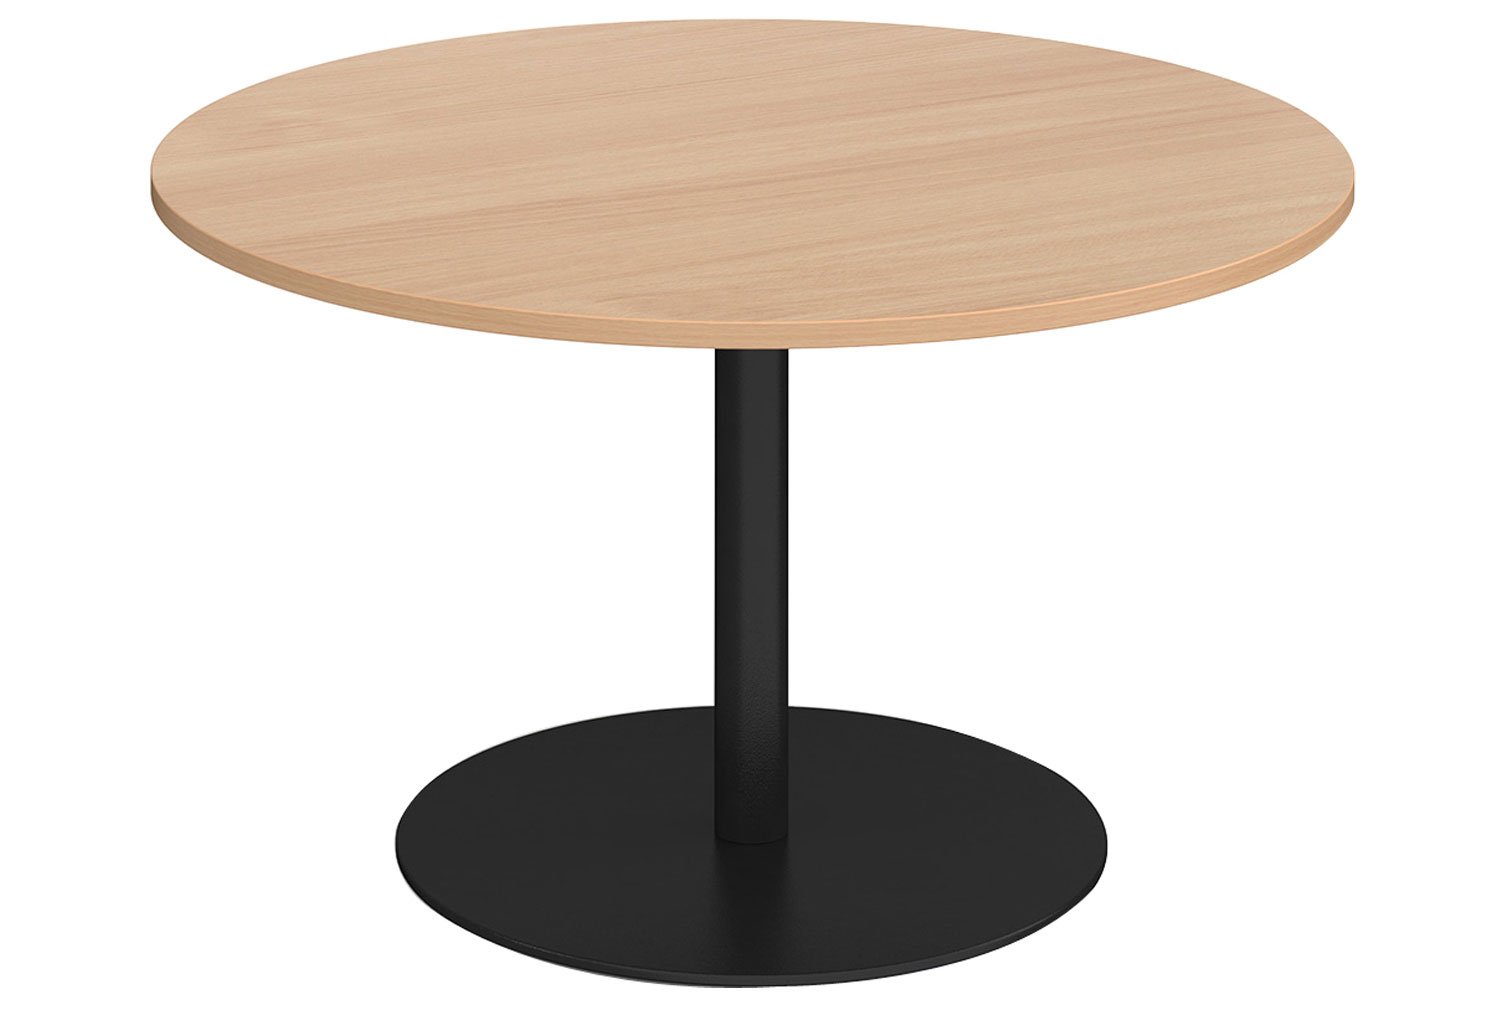 Tasso Round Boardroom Table, 120diax73h (cm), Beech, Express Delivery